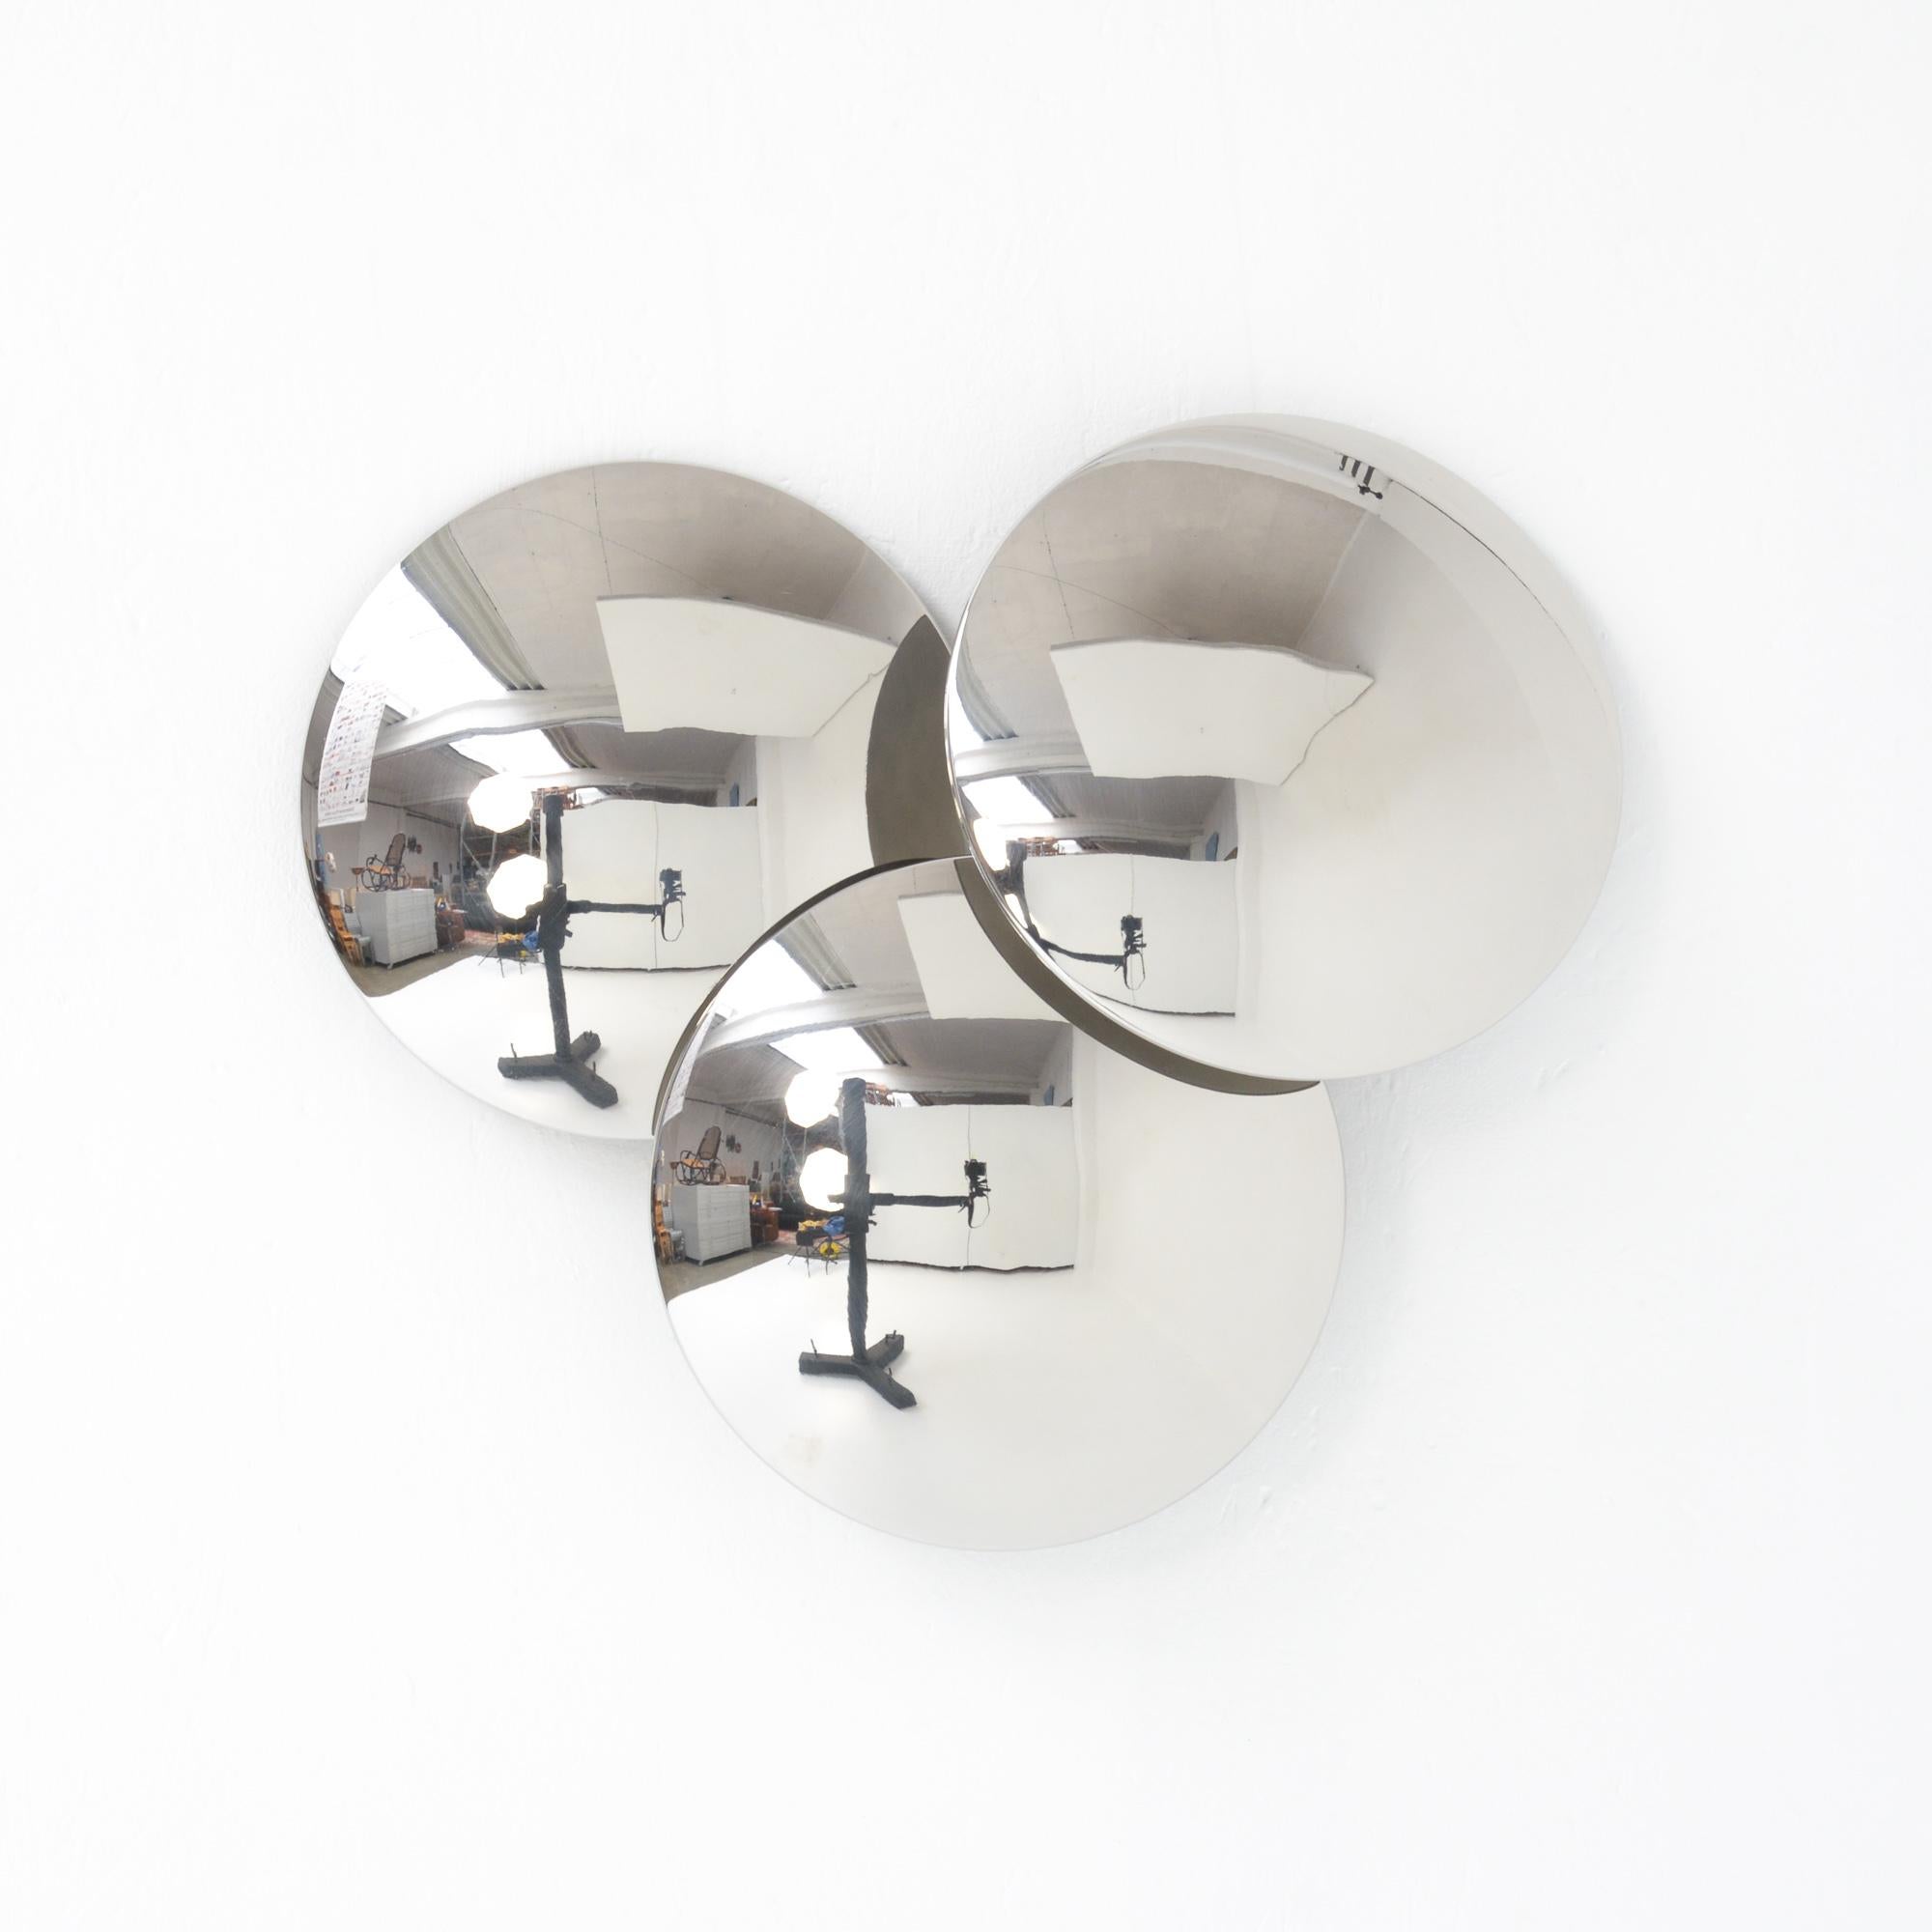 This amazing wall lamp was created and manufactured by Reggiani in Italy in the 1970s.
The three chrome convex discs (diameter 26,5 cm) are placed in a perfect composition, so the light bulb is not visible.
The discs work like mirrors and reflect